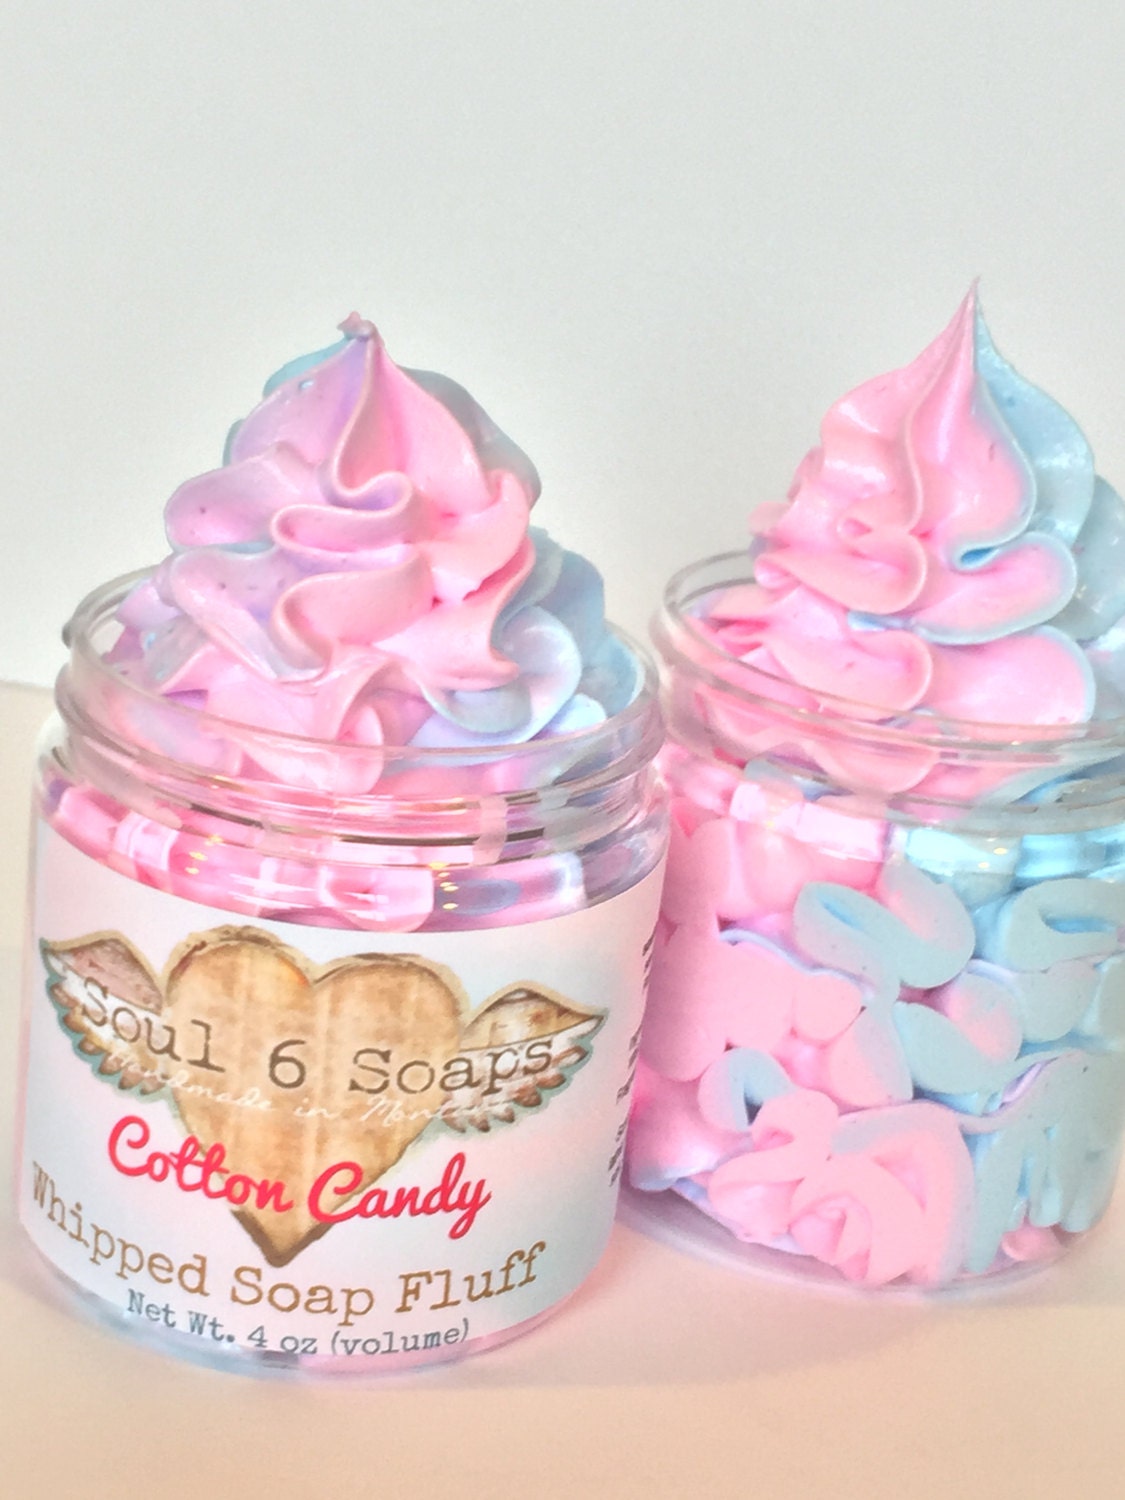 Download Whipped Soap Fluff Cotton Candy 4 oz.